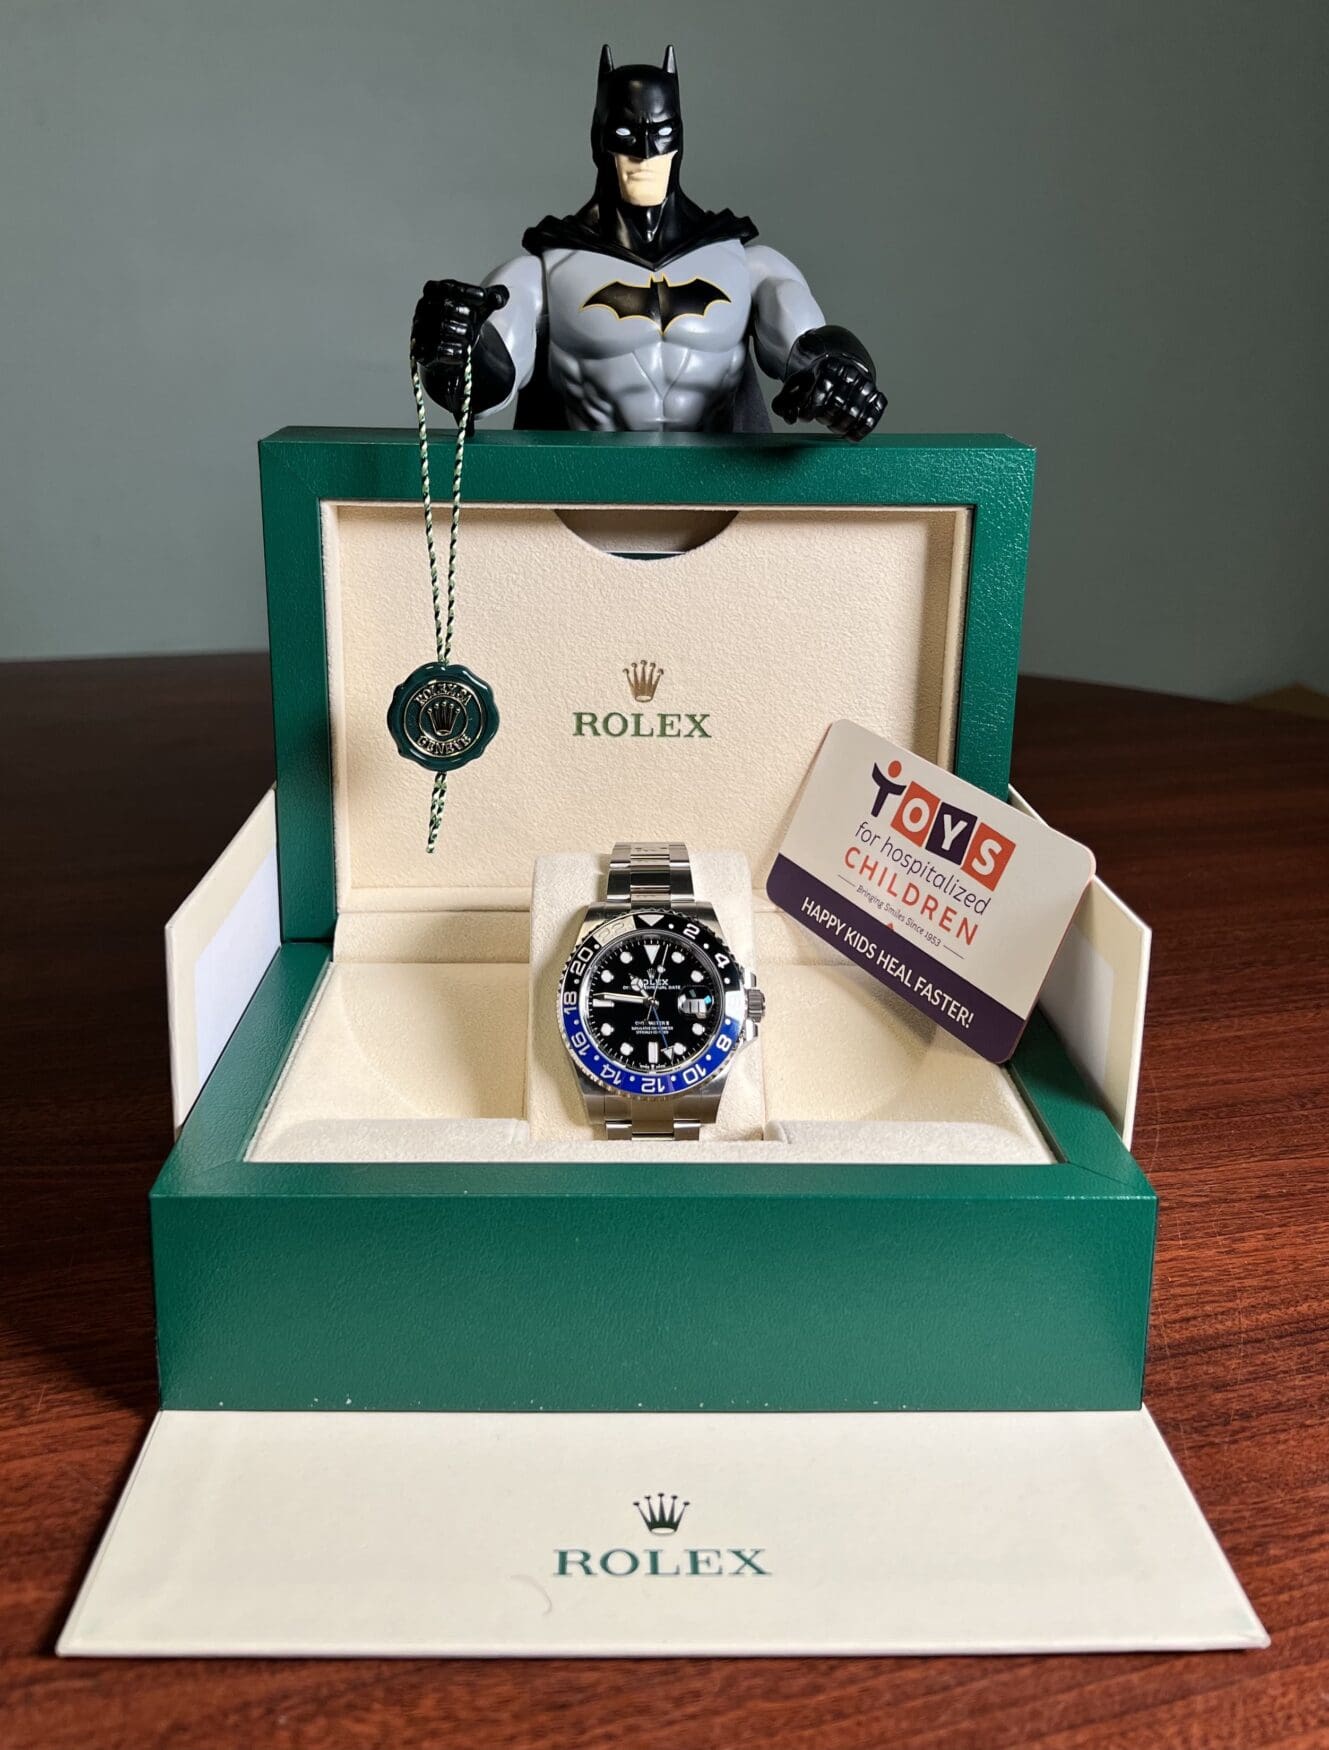 Want a brand new Rolex GMT Master II “Batman” for $25? This charity raffle offers that chance…